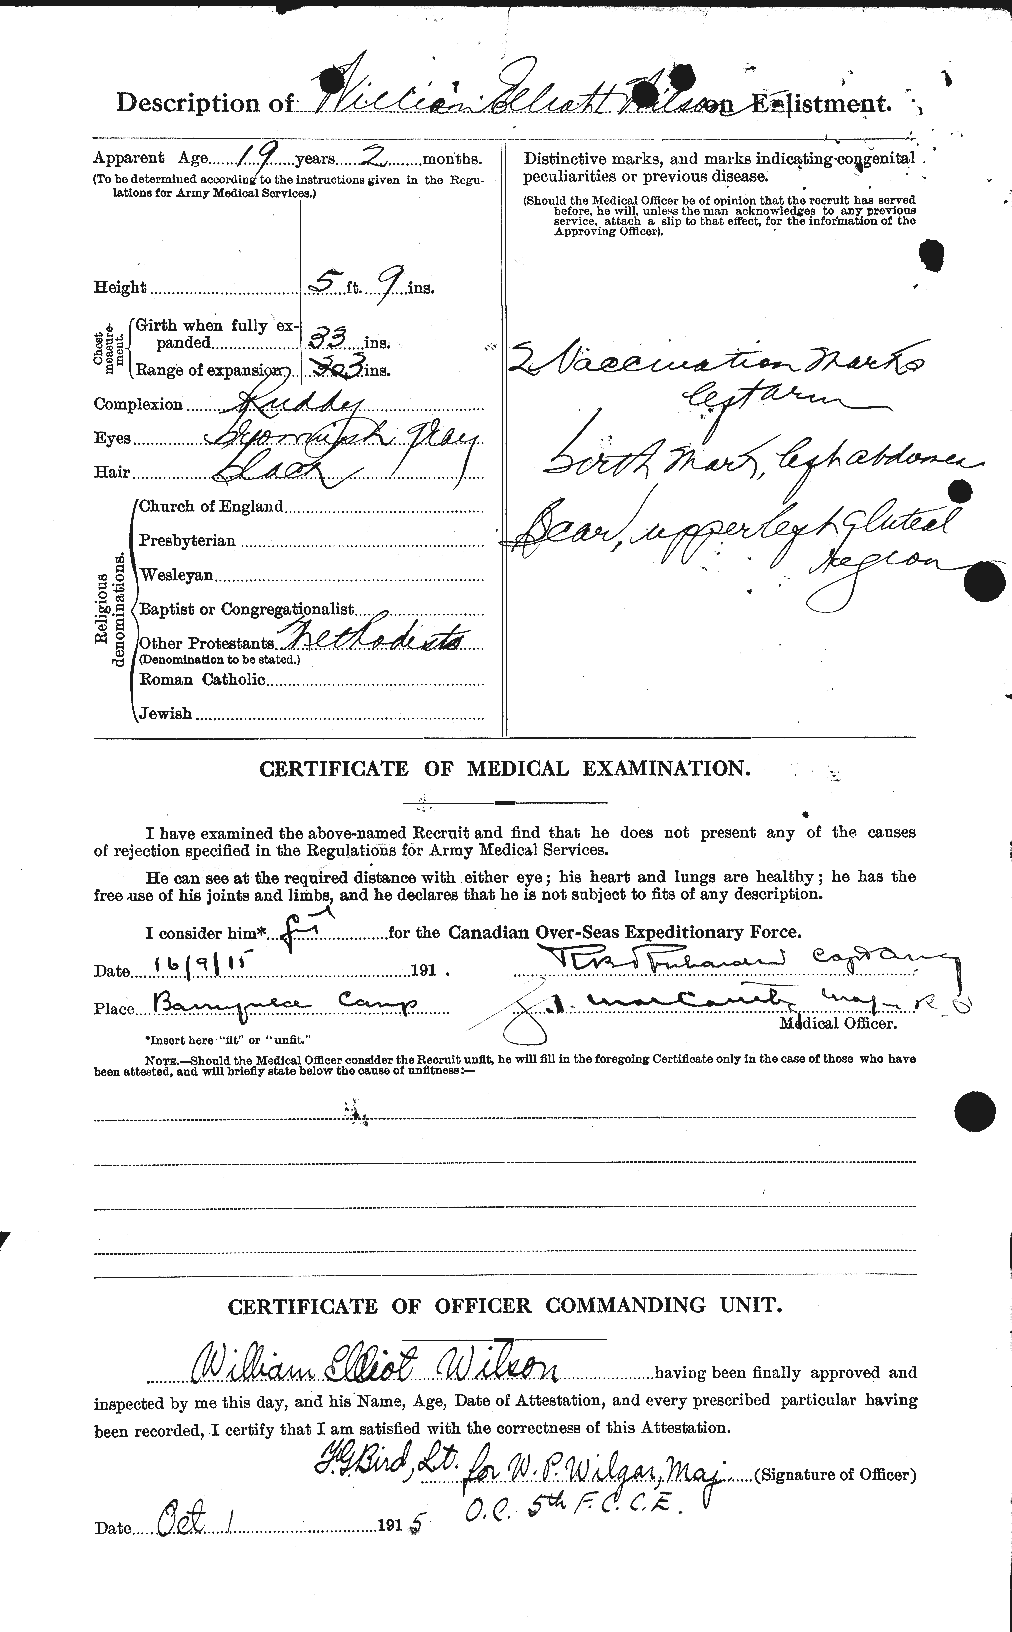 Personnel Records of the First World War - CEF 681980b